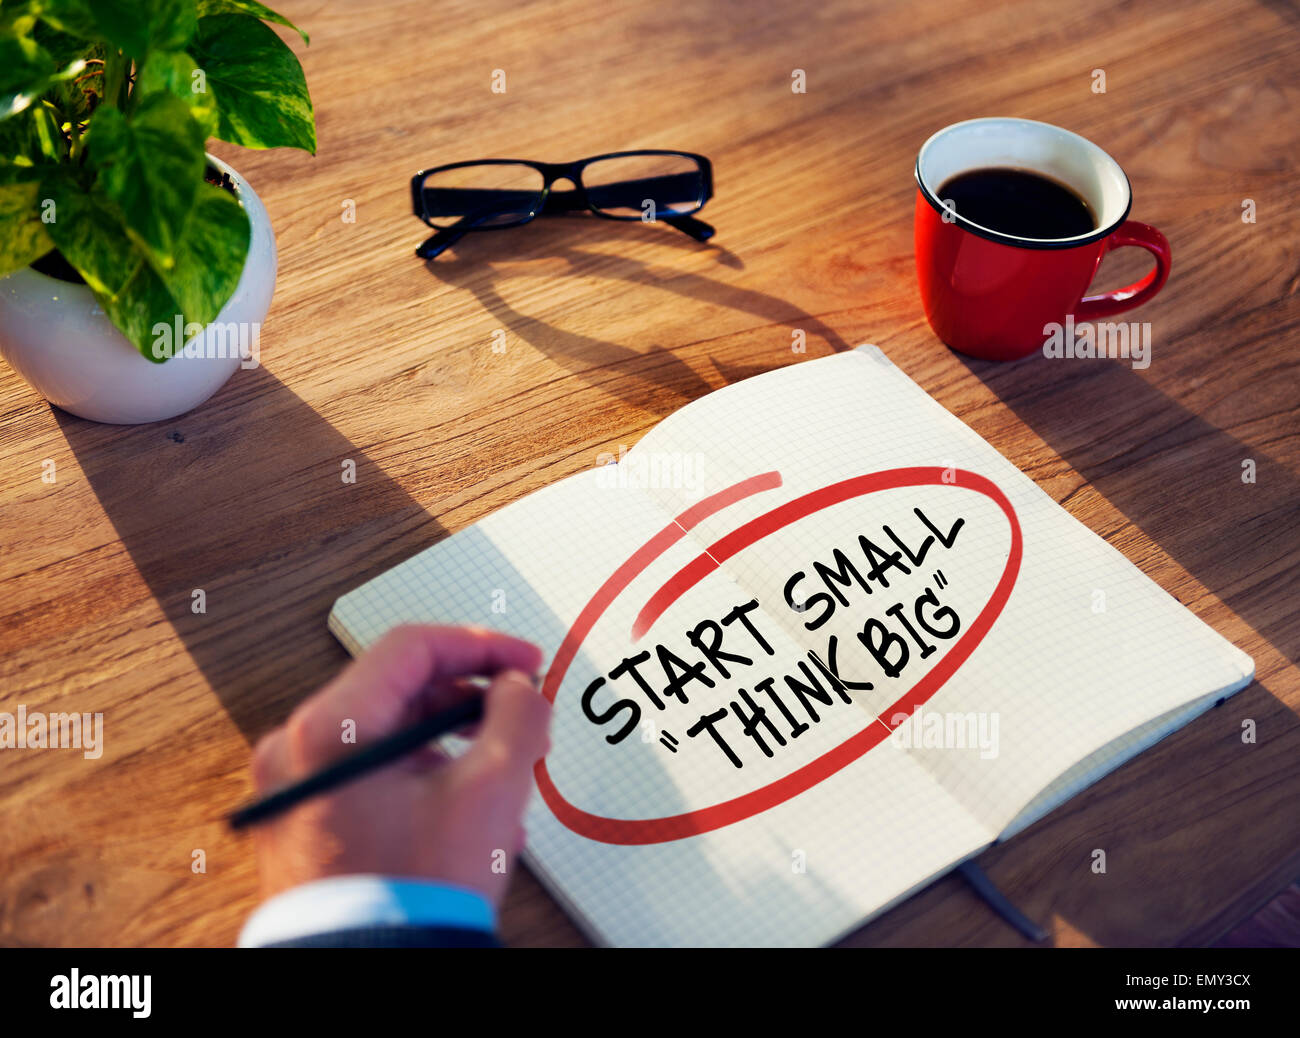 Businessman Writing the Words 'Start Small Think Big' Stock Photo